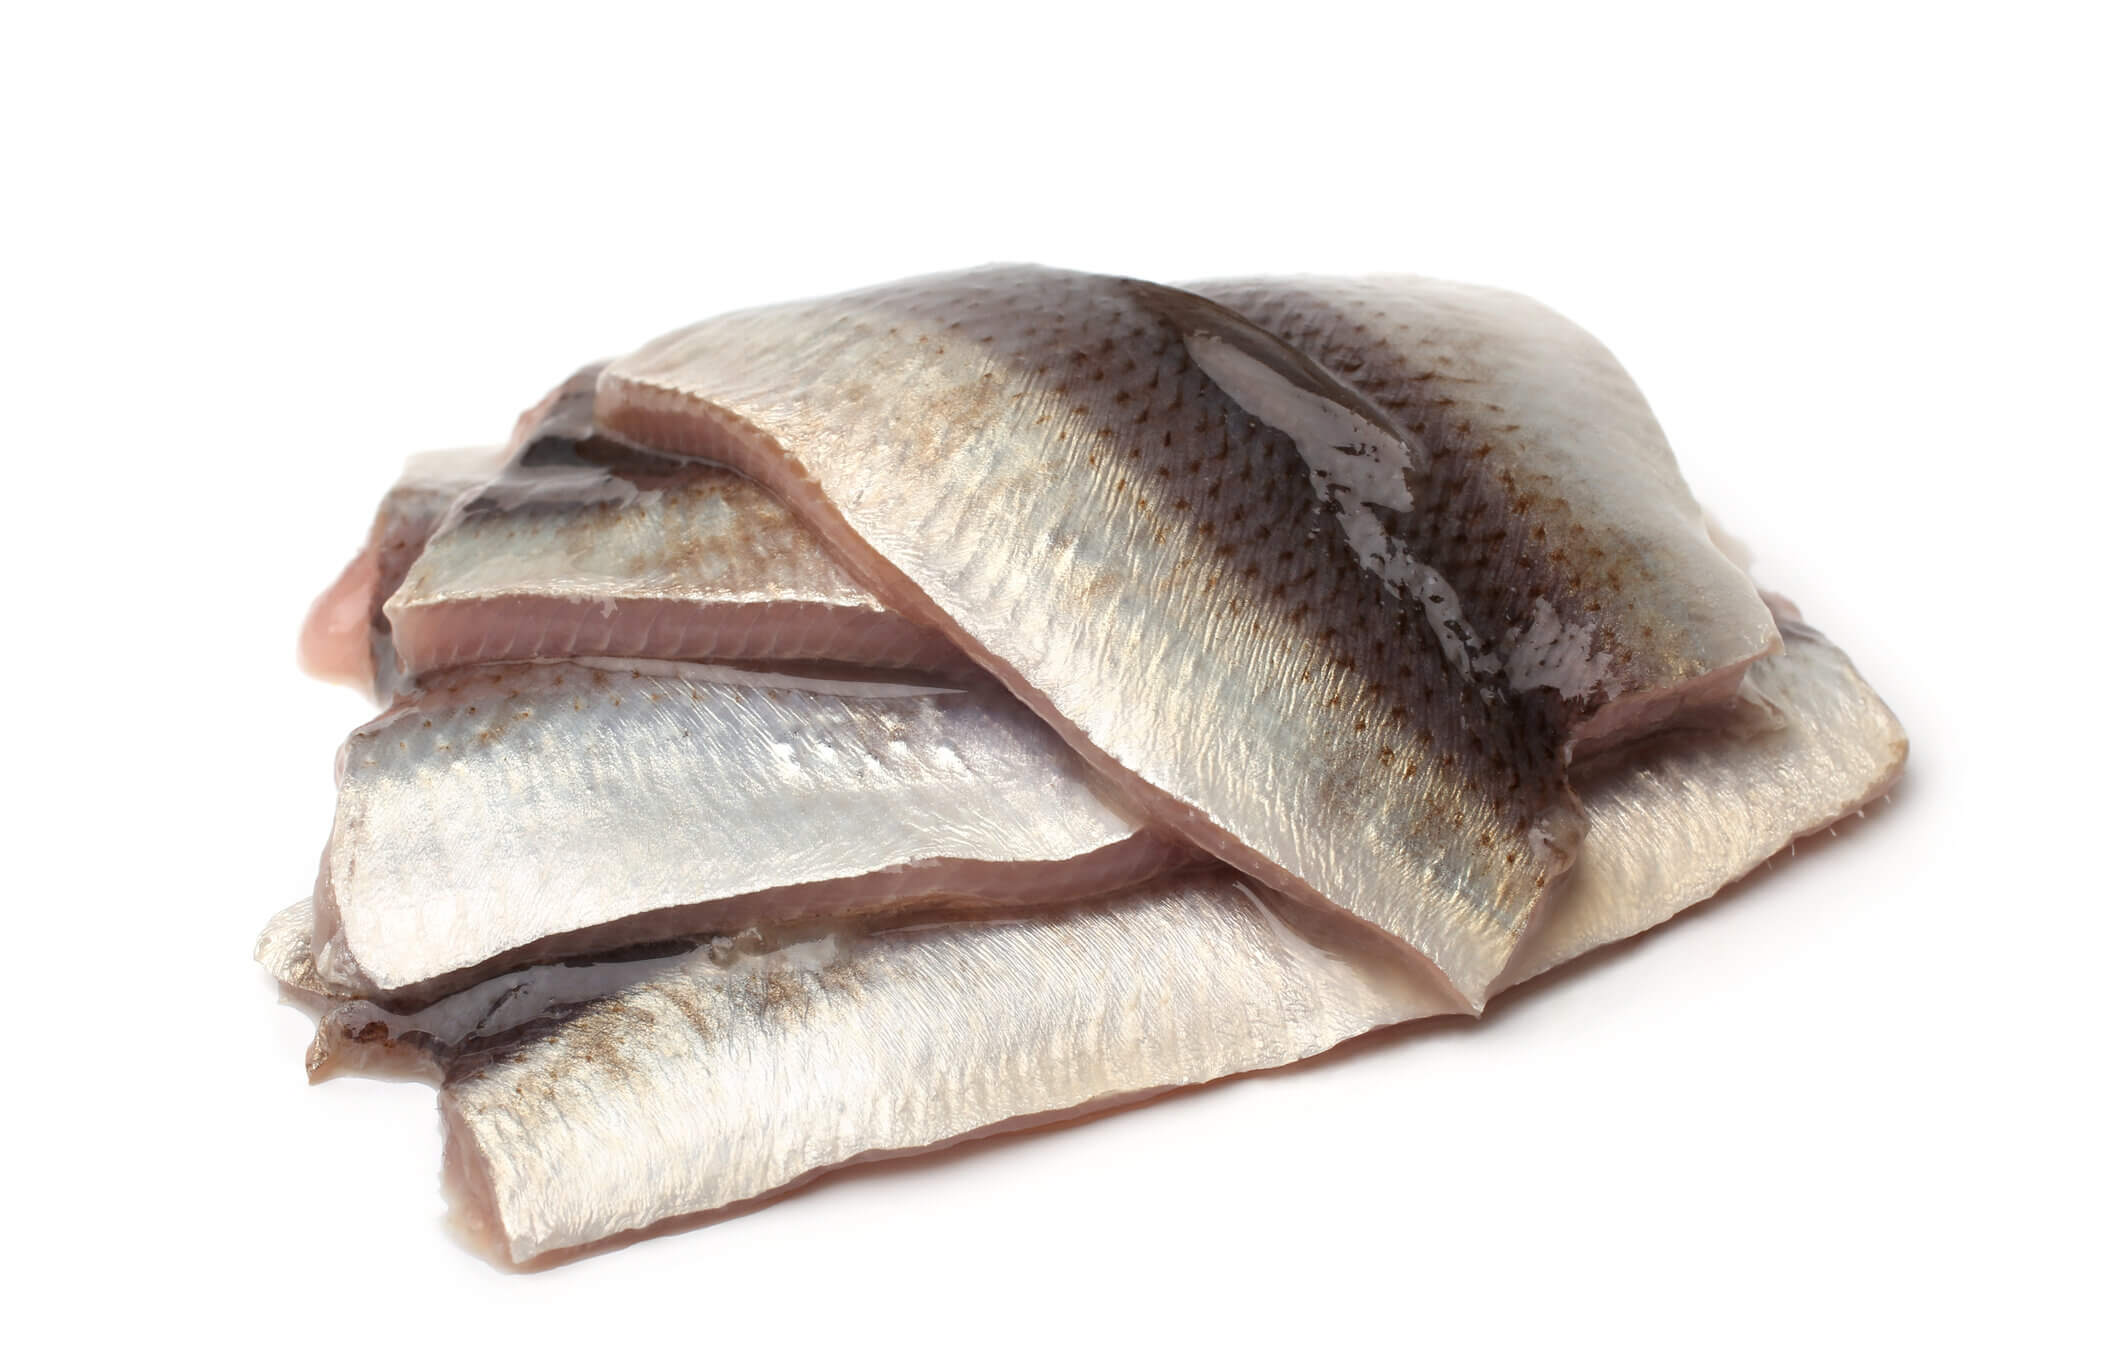 Herring is a staple in many European countries, especially the Netherlands and Scandinavia, where it has been considered a delicacy for over 2,000 years.